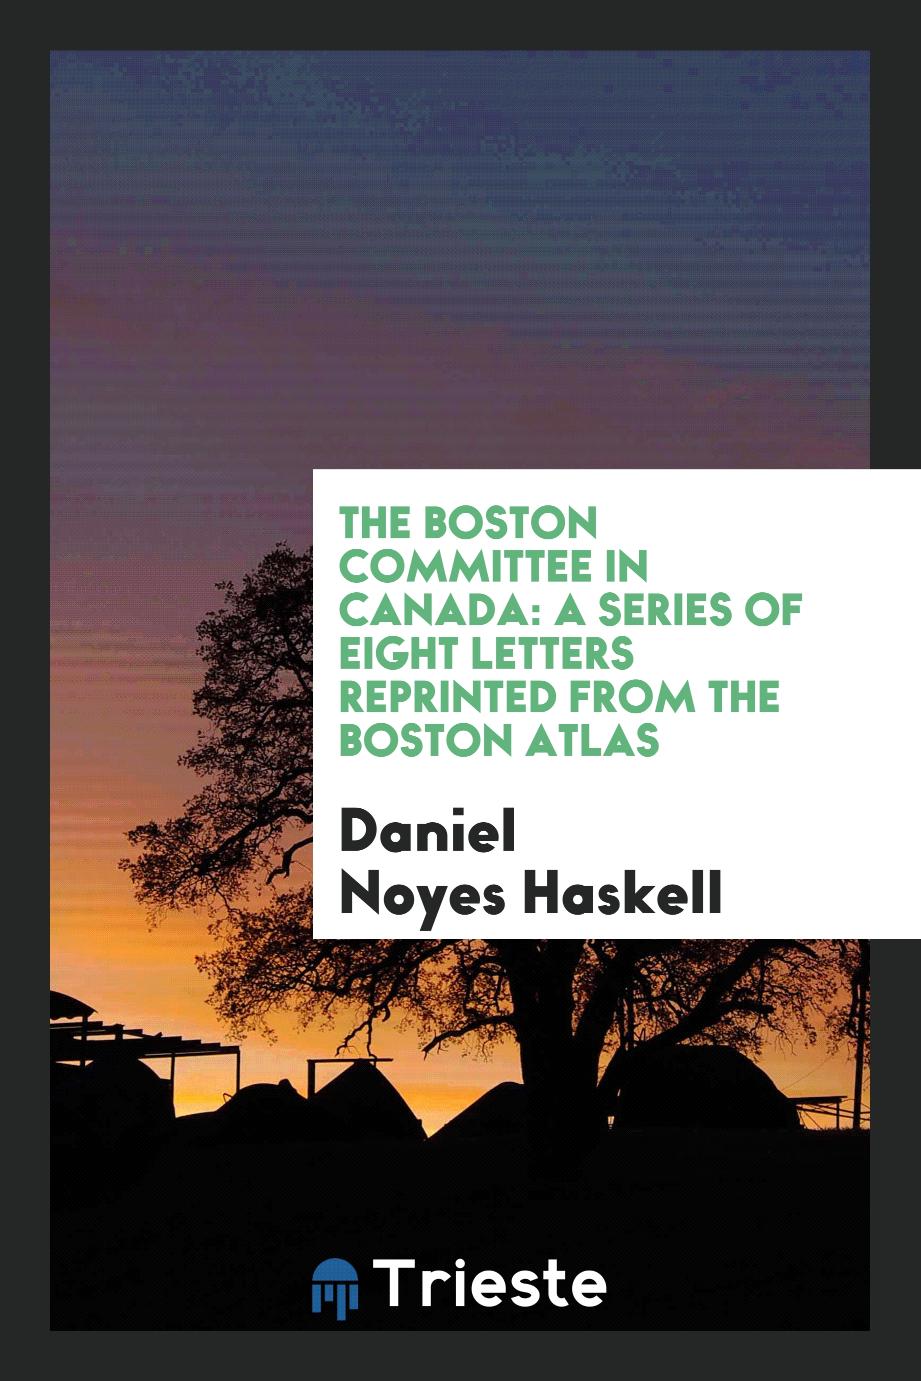 The Boston Committee in Canada: A Series of Eight Letters Reprinted from the Boston Atlas